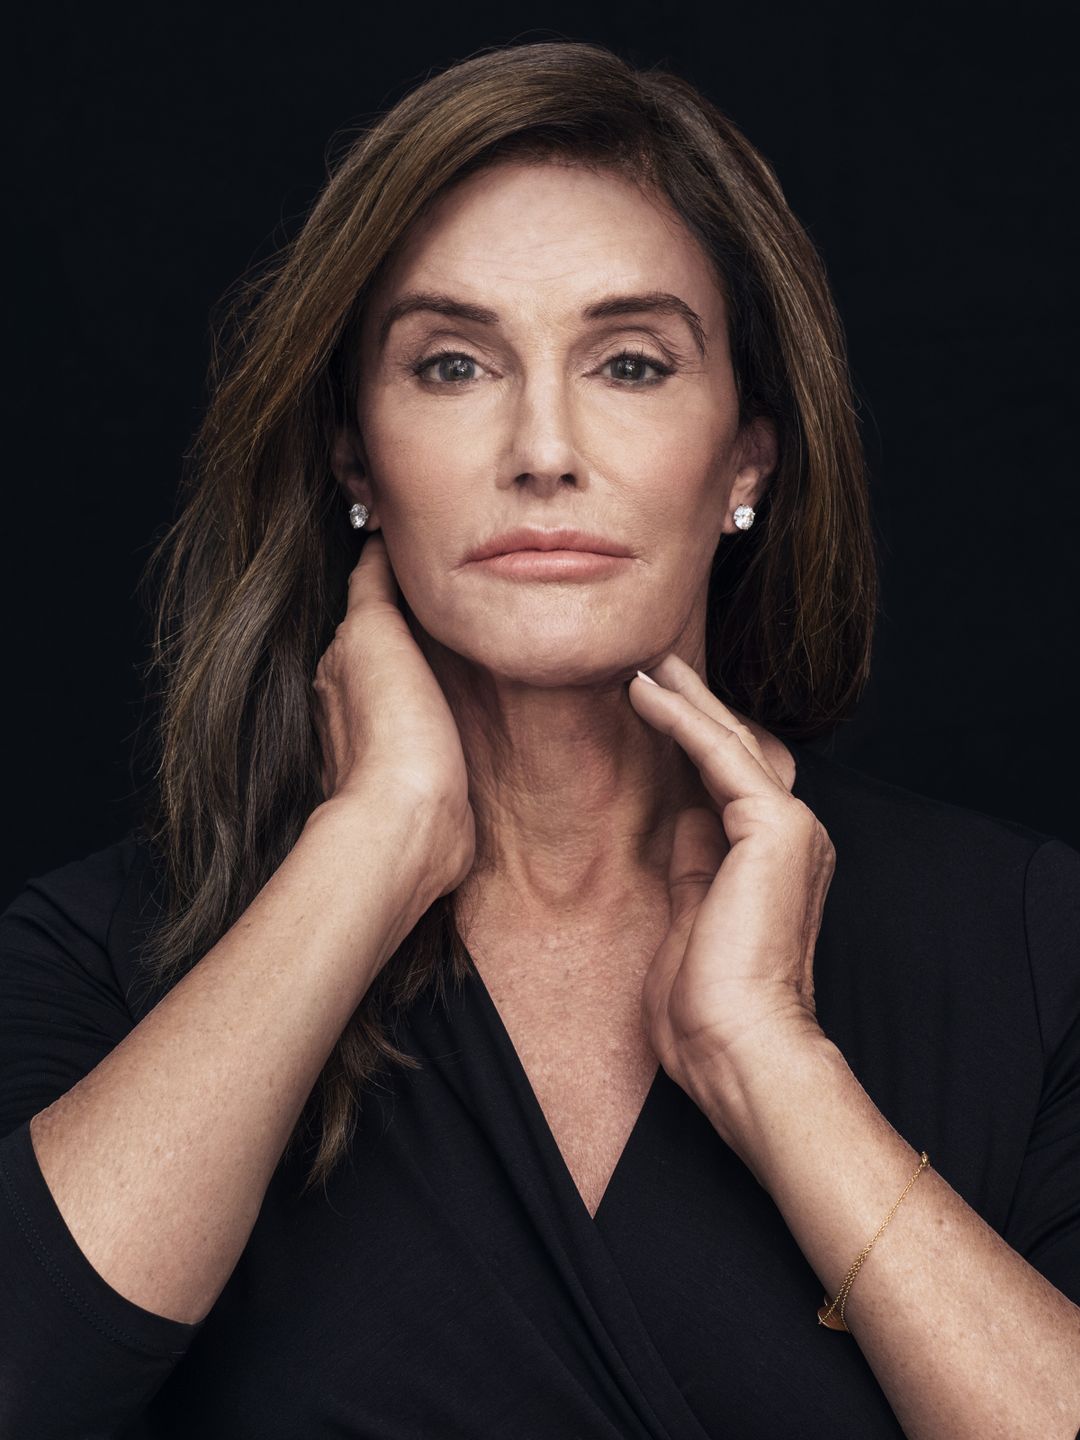 Caitlyn Jenner interesting facts